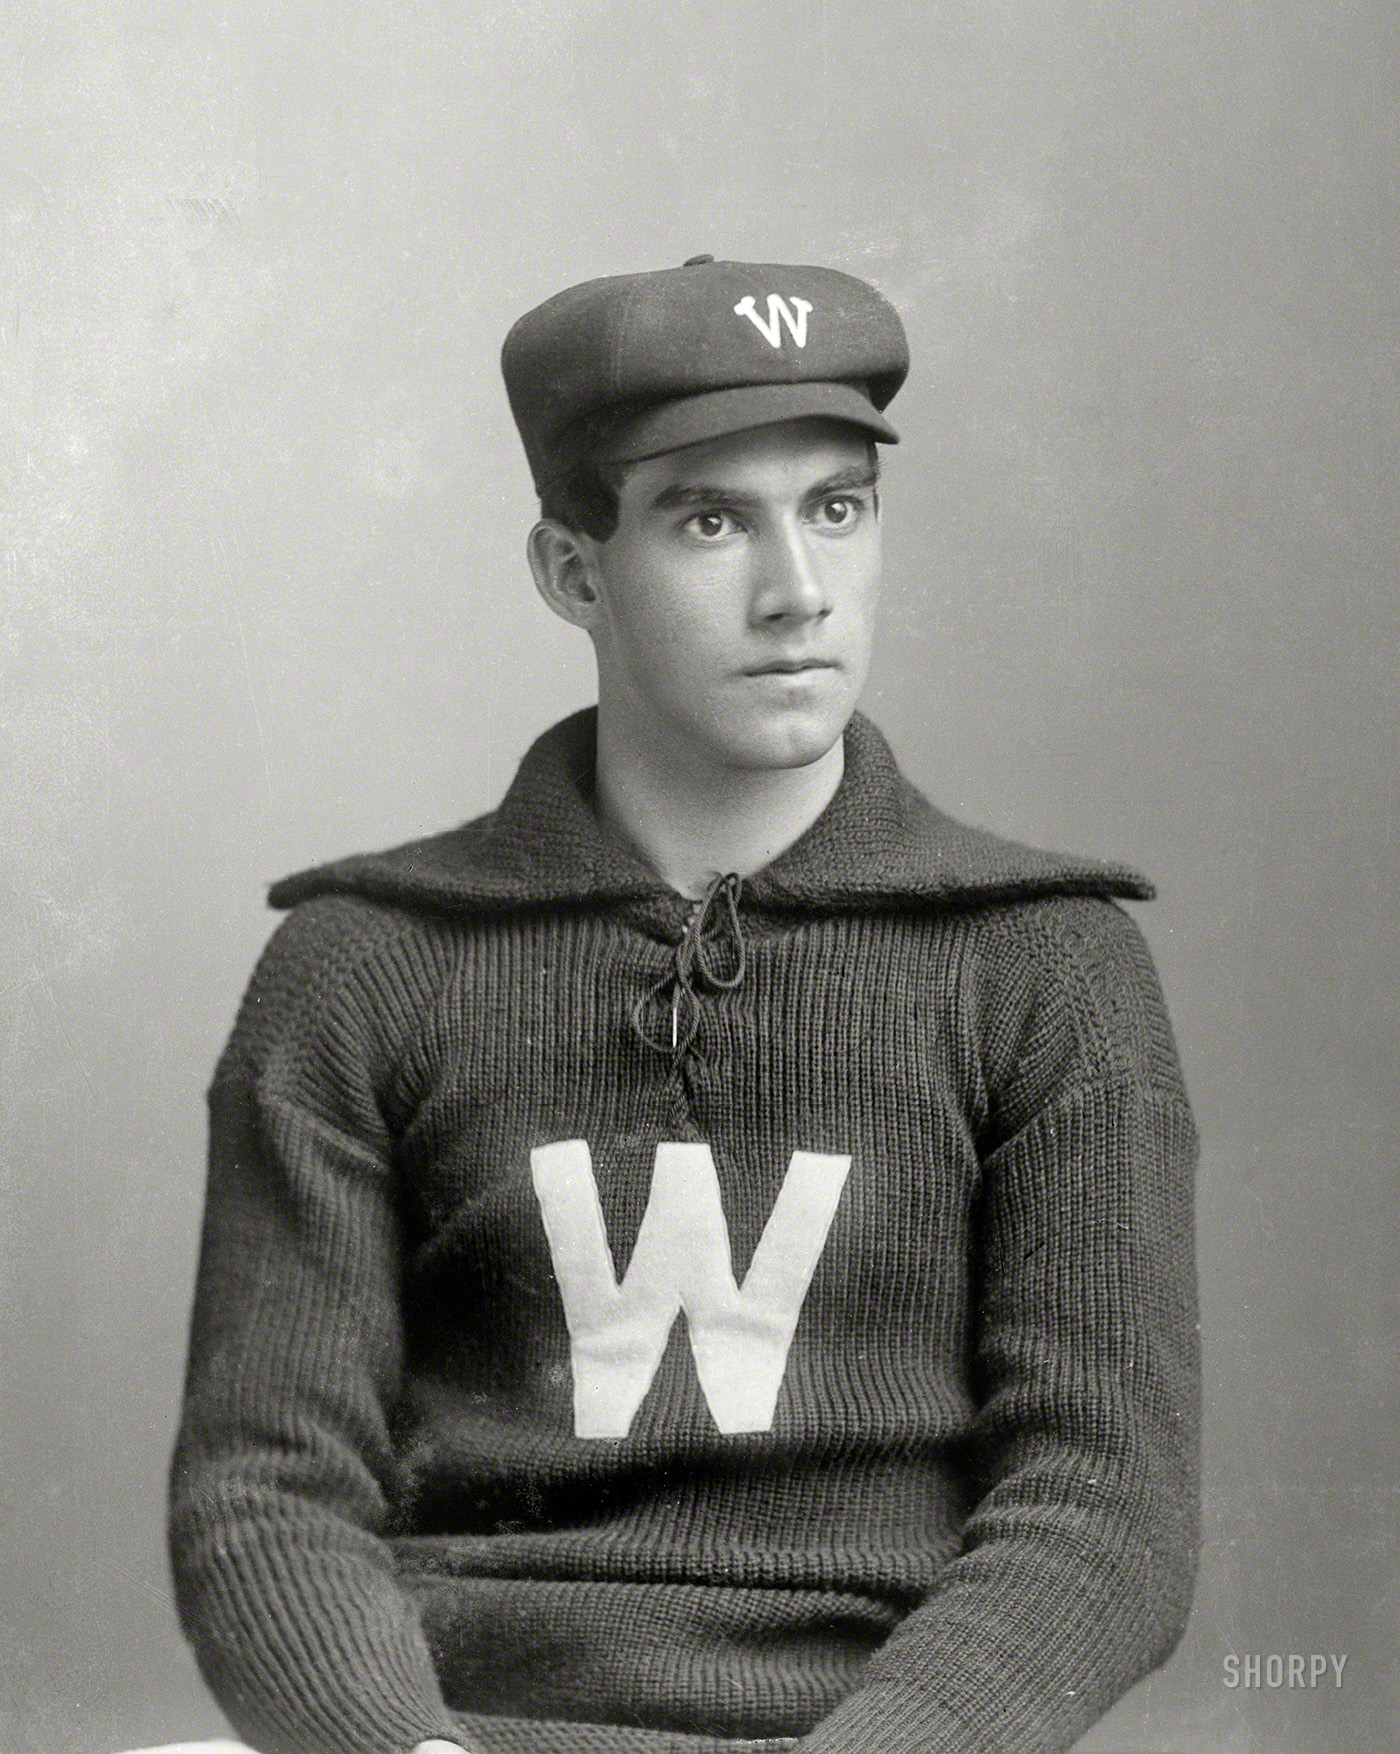 Circa 1896. "Mercer, Washington baseball." George Barclay "Win" Mercer (1874-1903). Glass negative from the C.M. Bell portrait studio. View full size.



MERCER'S TRAGIC END
Ball Player, 28, Takes Own Life in San Francisco.

&nbsp; &nbsp; &nbsp; &nbsp; SAN FRANCISCO, Jan. 13 -- Winnie D. Mercer, a pitcher for the American baseball team, registered at the Occidental Hotel last evening and was found asphyxiated in his room to-day. Mercer was registered under the name of George Murray  and gave his residence as Philadelphia. The watchman of the hotel in making his rounds detected the odor of gas coming from Mercer's room, and, failing to receive a response to his knocking, broke down the door. Clad in his night clothes and lying in the bed with his coat and vest covering his head, Mercer was found. From the gas jet in the center of the room was suspended a rubber tube, and the end of this Mercer had placed in his mouth, after turning the gas full on.

&nbsp; &nbsp; &nbsp; &nbsp; Mercer's identity was established by papers found among his effects, one of which read: "Tell Mr. Van Horn, of the Langham Hotel, that Winnie Mercer has taken his life." He also left letters, one to his mother and another to a young lady of East Liverpool, Ohio, expressing regret over his deed and bidding them fond farewells. He left a statement of his financial accounts addressed to Tip O'Neill, and advised his friends to avoid games of chance and women.
-- Washington Post, January 14, 1903.